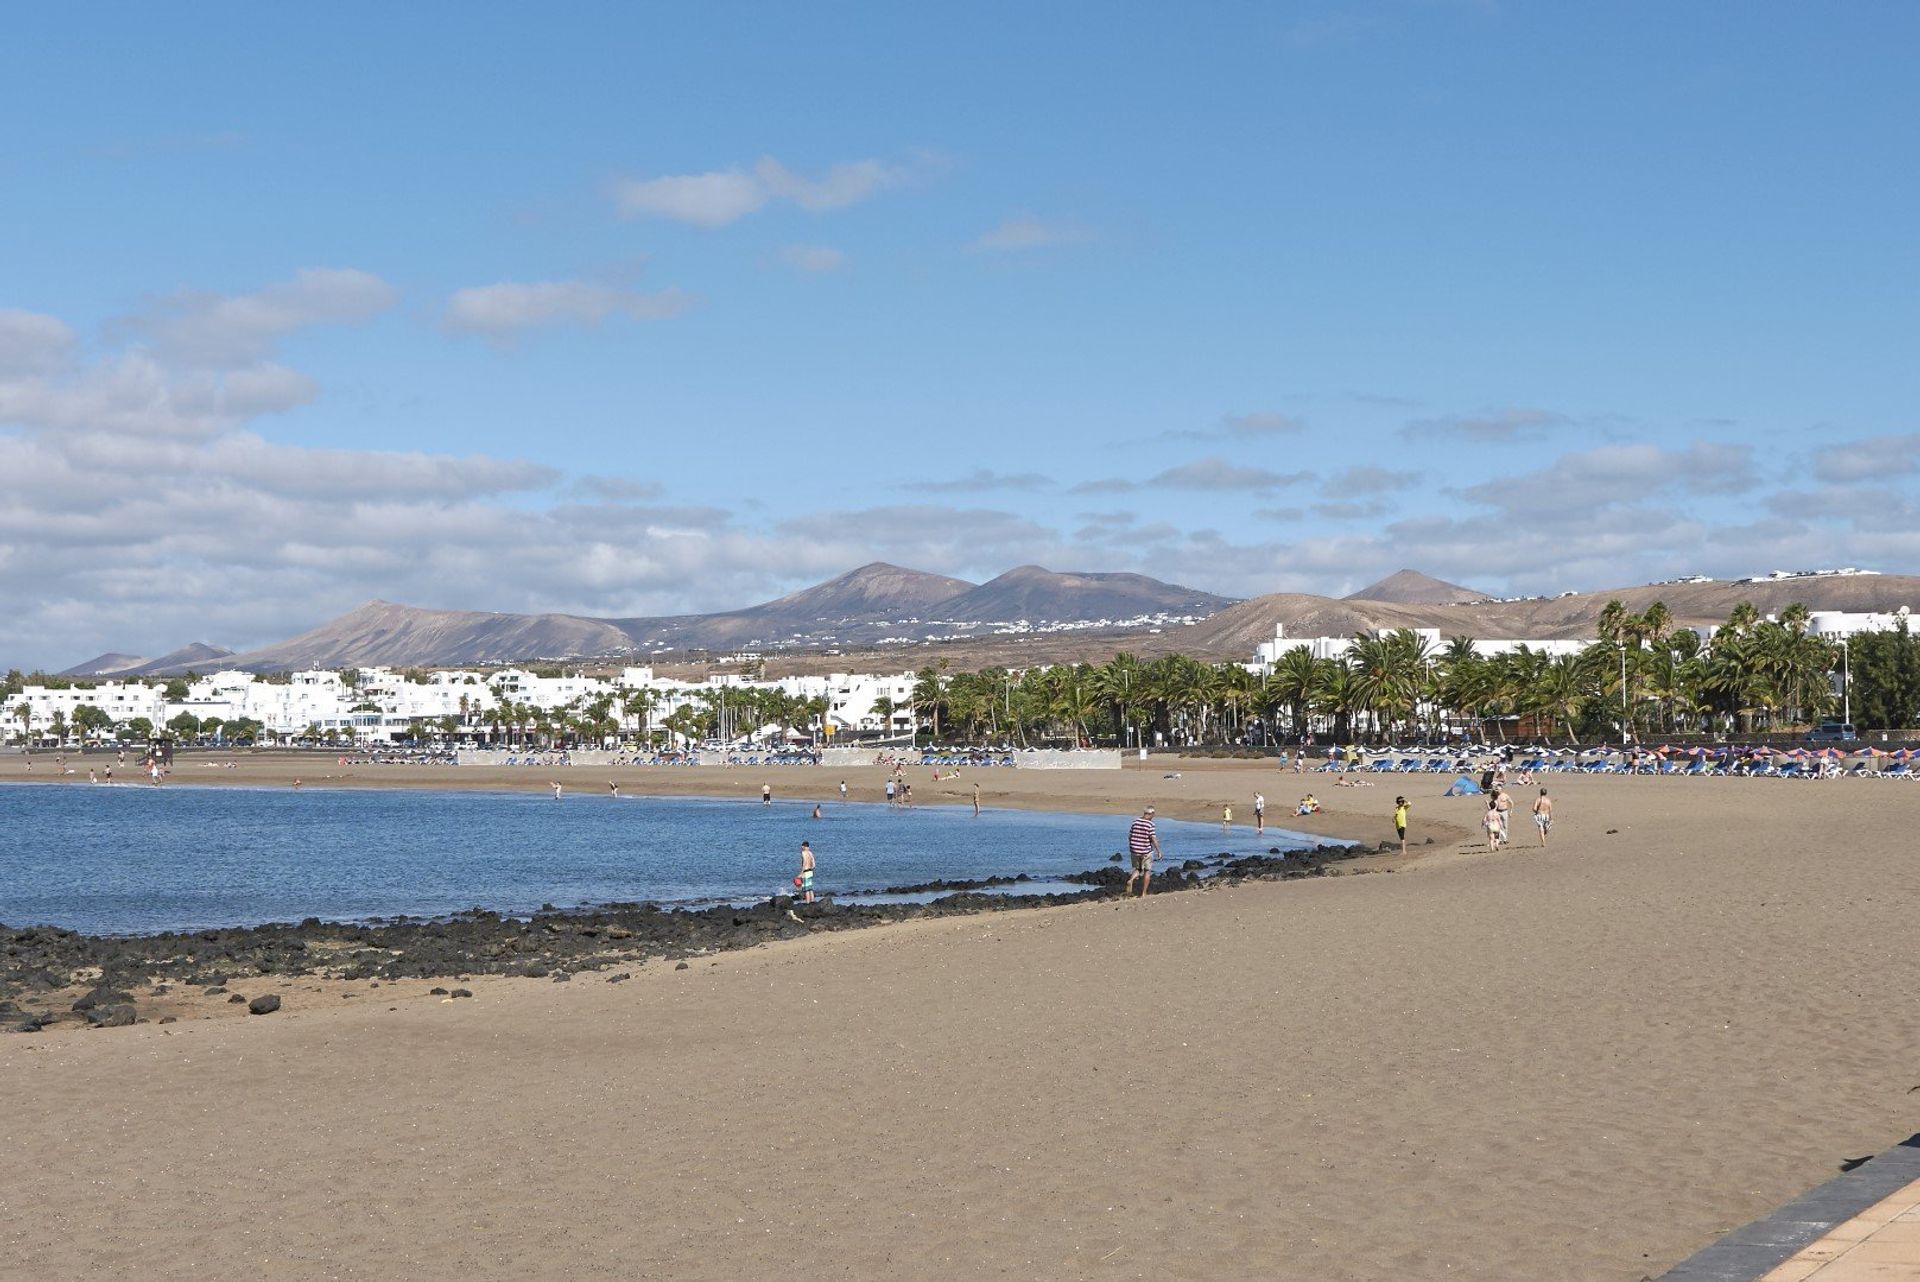 The Blue Flag beach of Los Pocillos, one of three local beaches in Puerto del Carmen